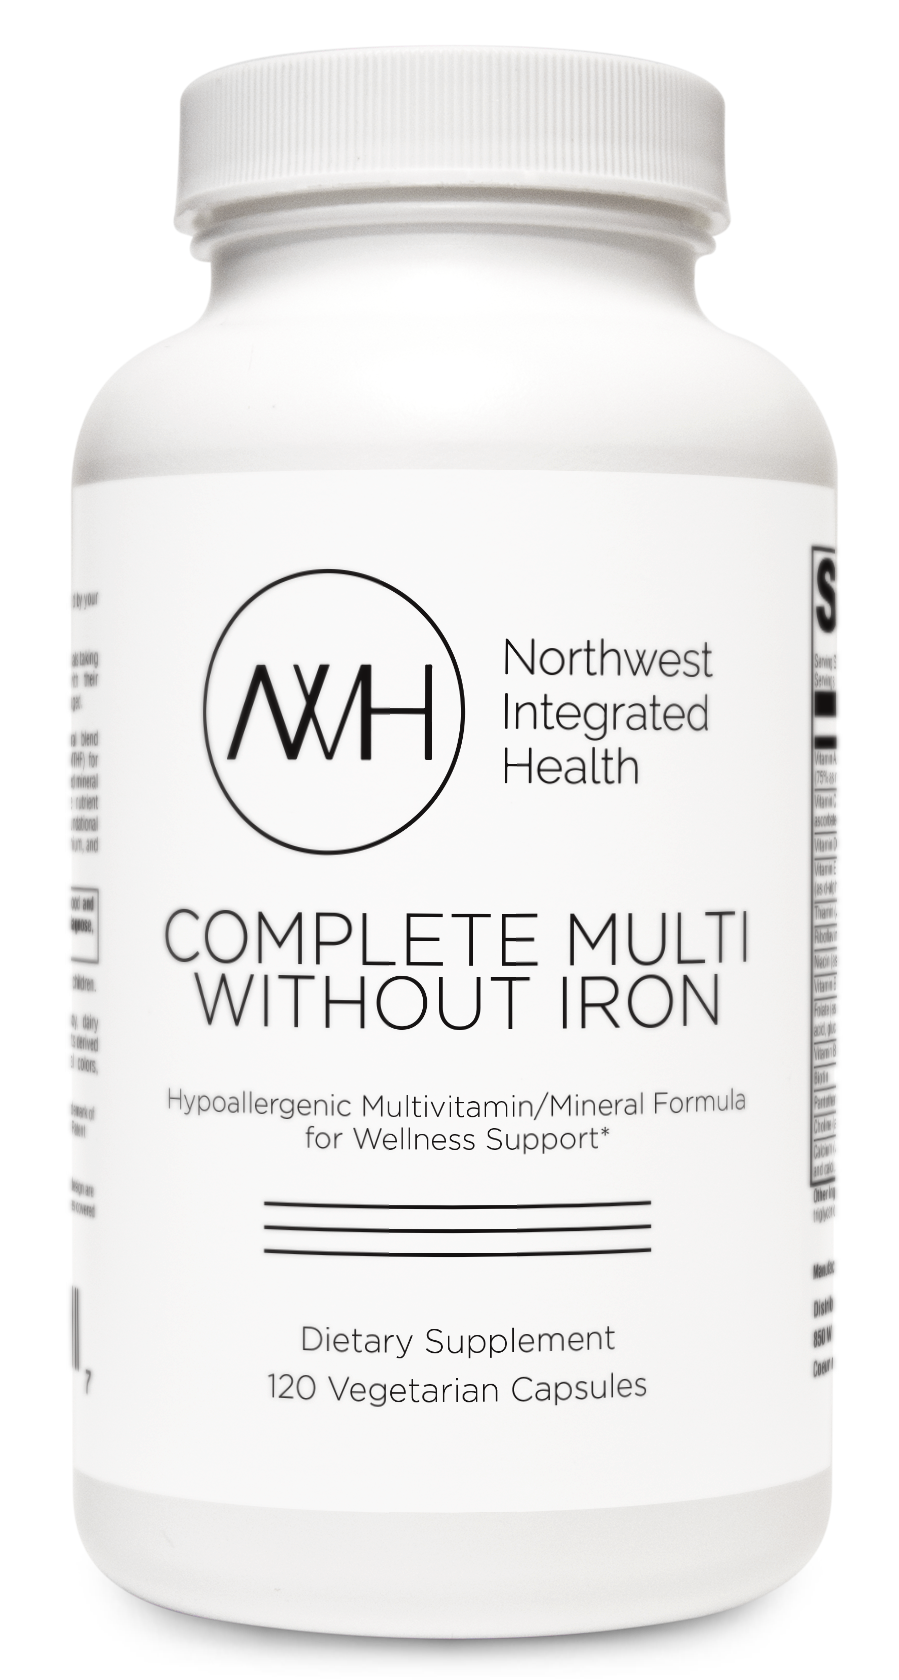 COMPLETE MULTI WITHOUT IRON (120 Capsules)